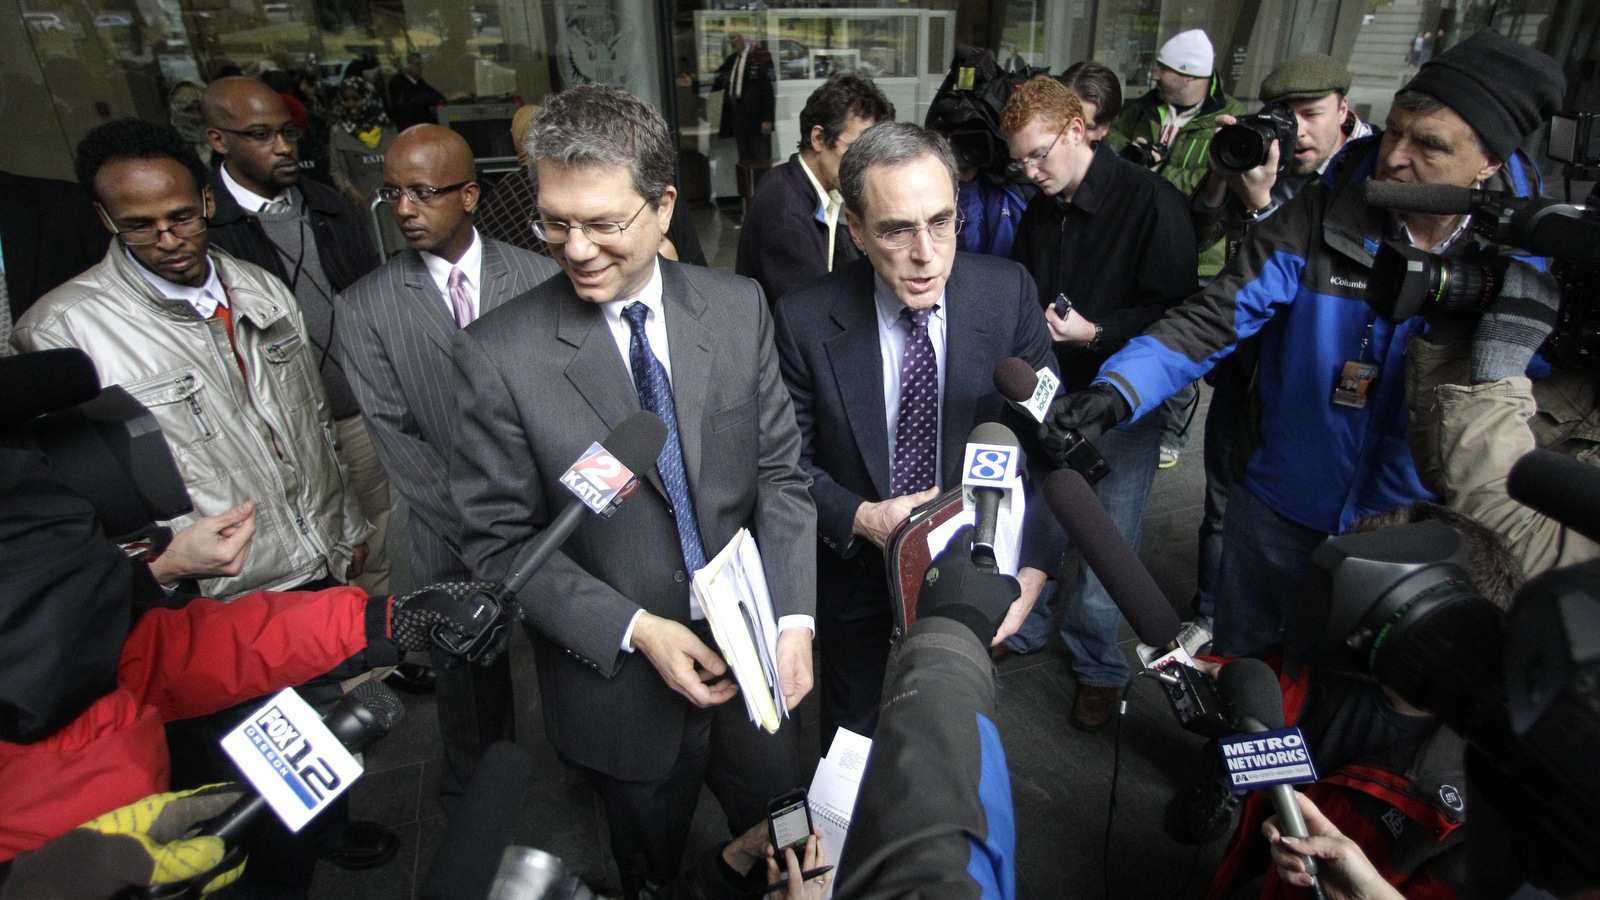 Steven T. Wax, right, federal public defender and Stephen R. Sady, the chief deputy public defender, speak to reporters following an appearance in federal court by thier client, Mohamed Osman Mohamud Monday, Nov. 29, 2010, in Portland, Ore. Authorities say Mohamud and an FBI operative parked a van full of dummy explosives on Southwest Yamhill Street across from Pioneer Courthouse Square just after sundown Friday while thousands gathered in the square for the annual tree lighting. Mohamud is accused of attempting to detonate the explosives. (AP Photo/Rick Bowmer)